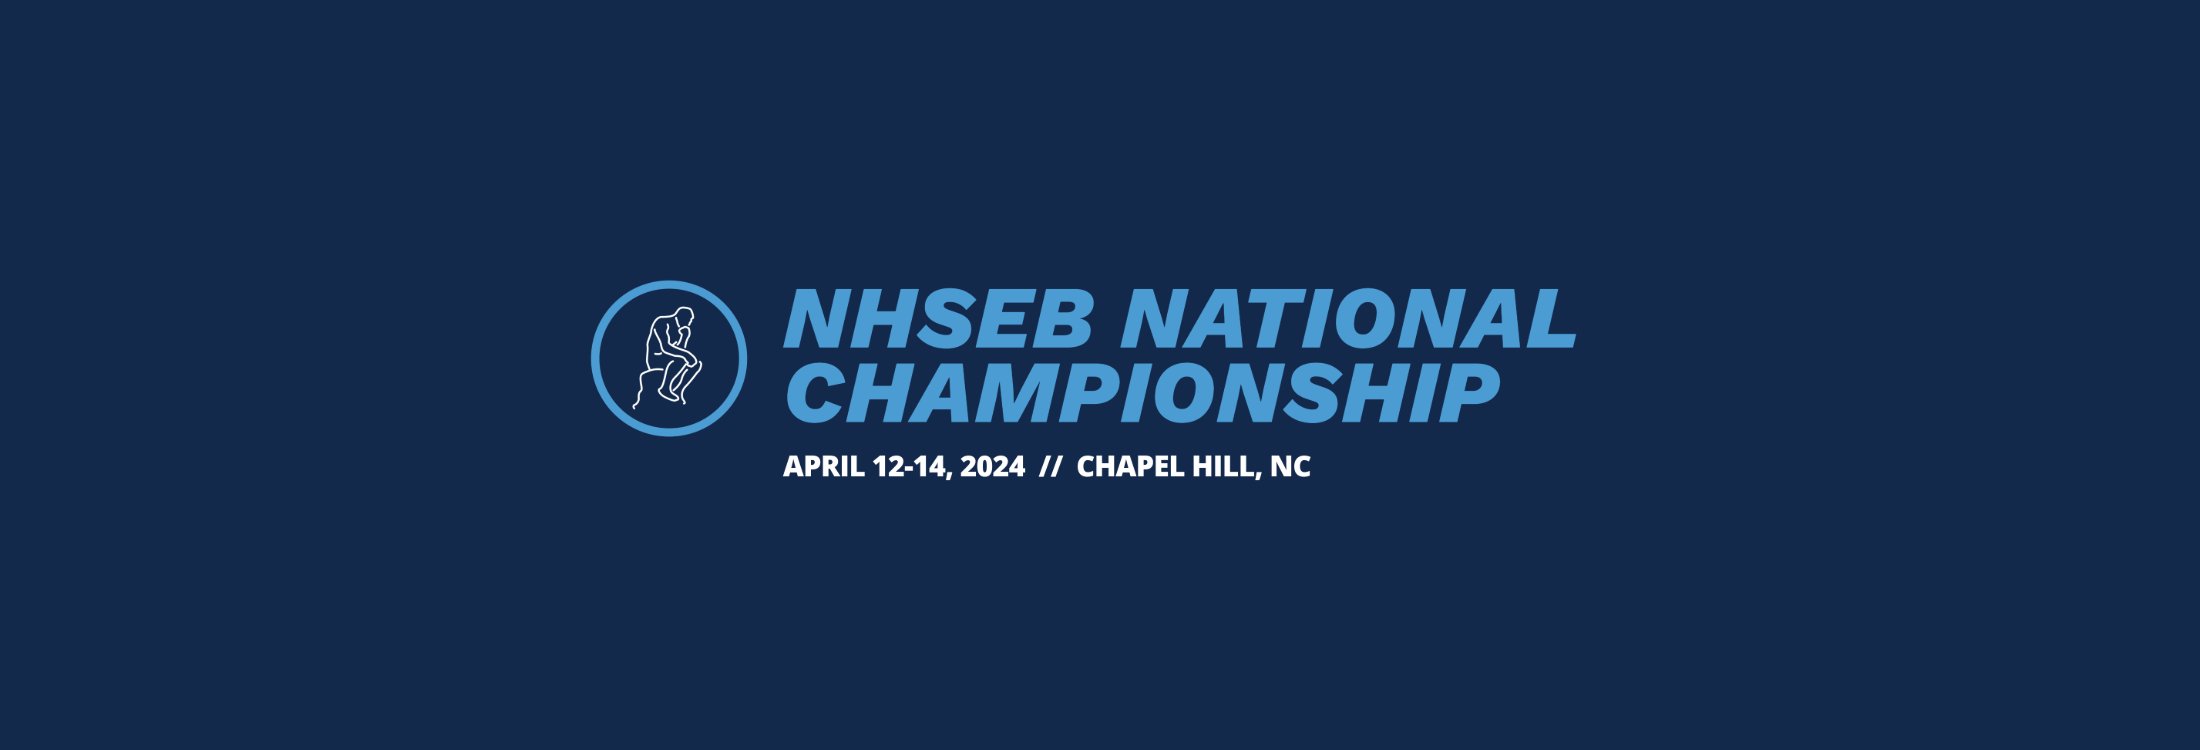 NHSEB 2024 Event Banner